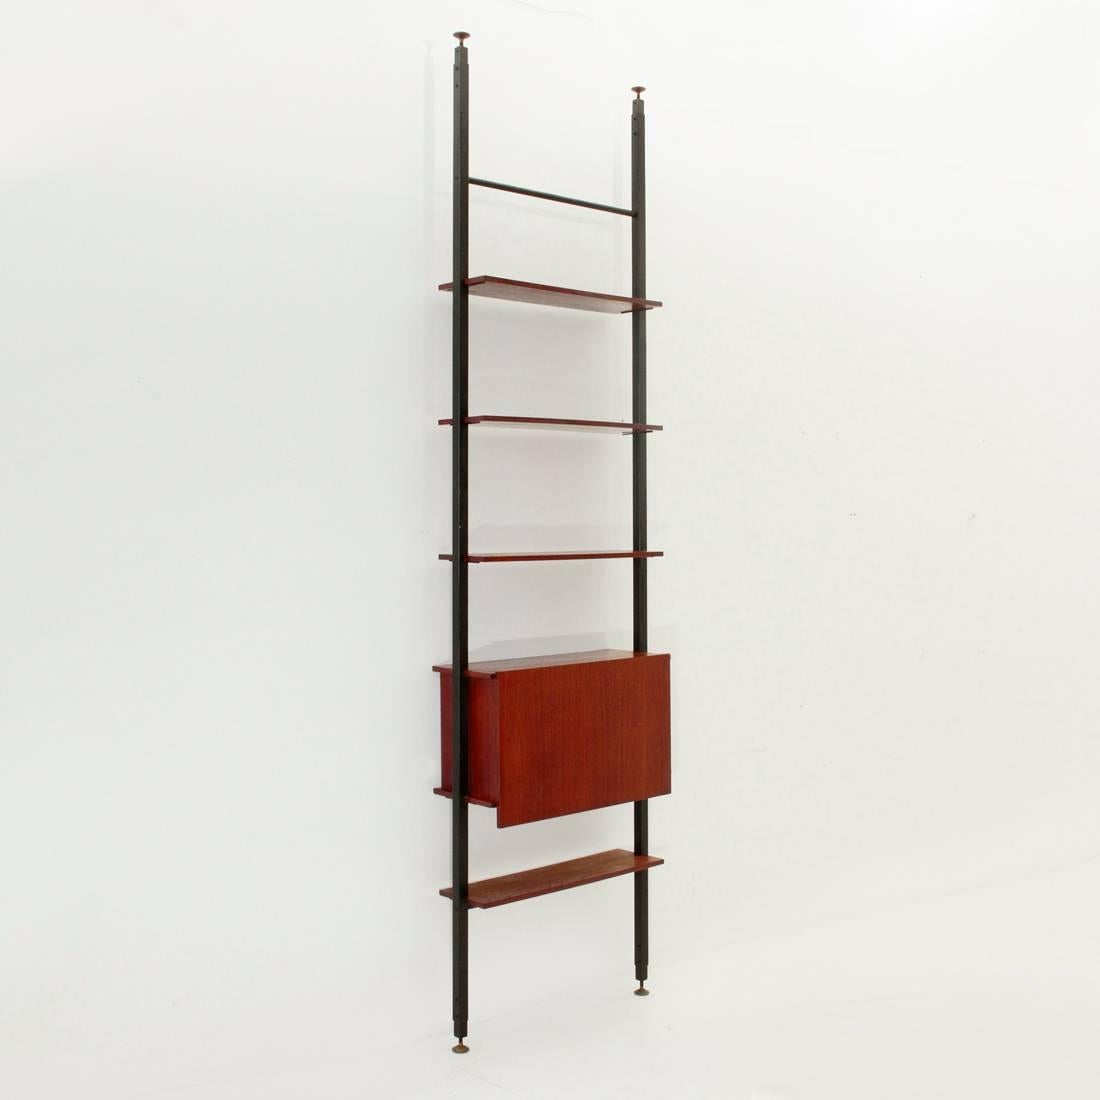 Wall unit produced by Domus Linea based on a project by Marco Lavarello.
Telescopic uprights in black painted metal. Brass feet.
Shelves and storage compartment in teak veneered wood.
Good general conditions, some signs due to normal use over